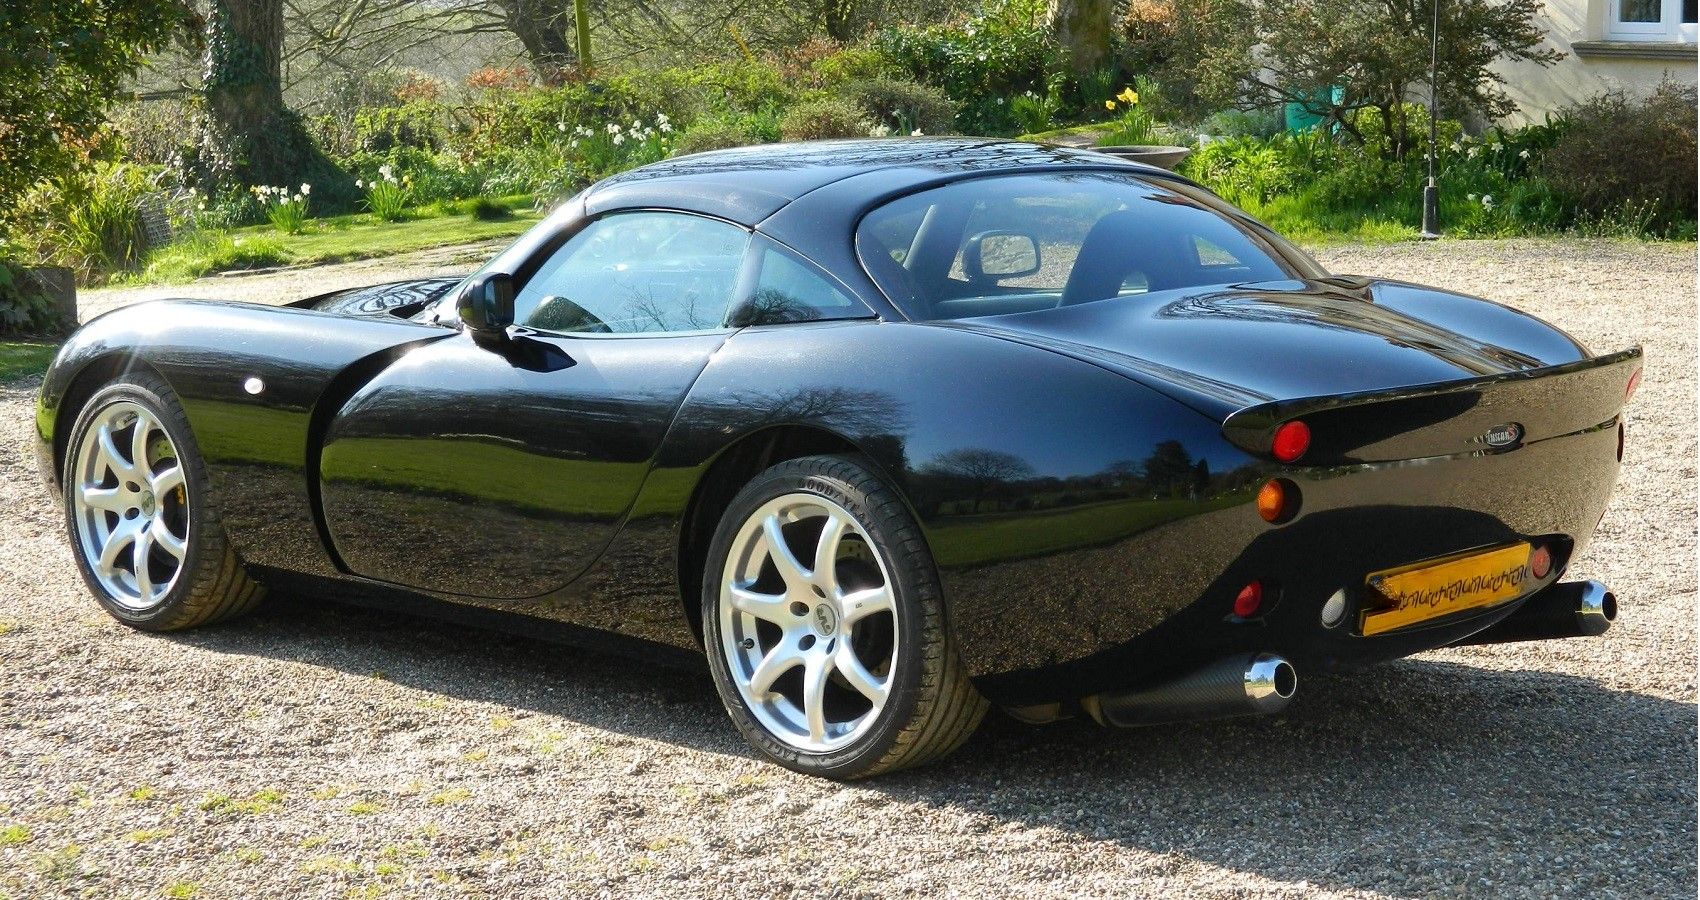 TVR Tuscan S - Rear